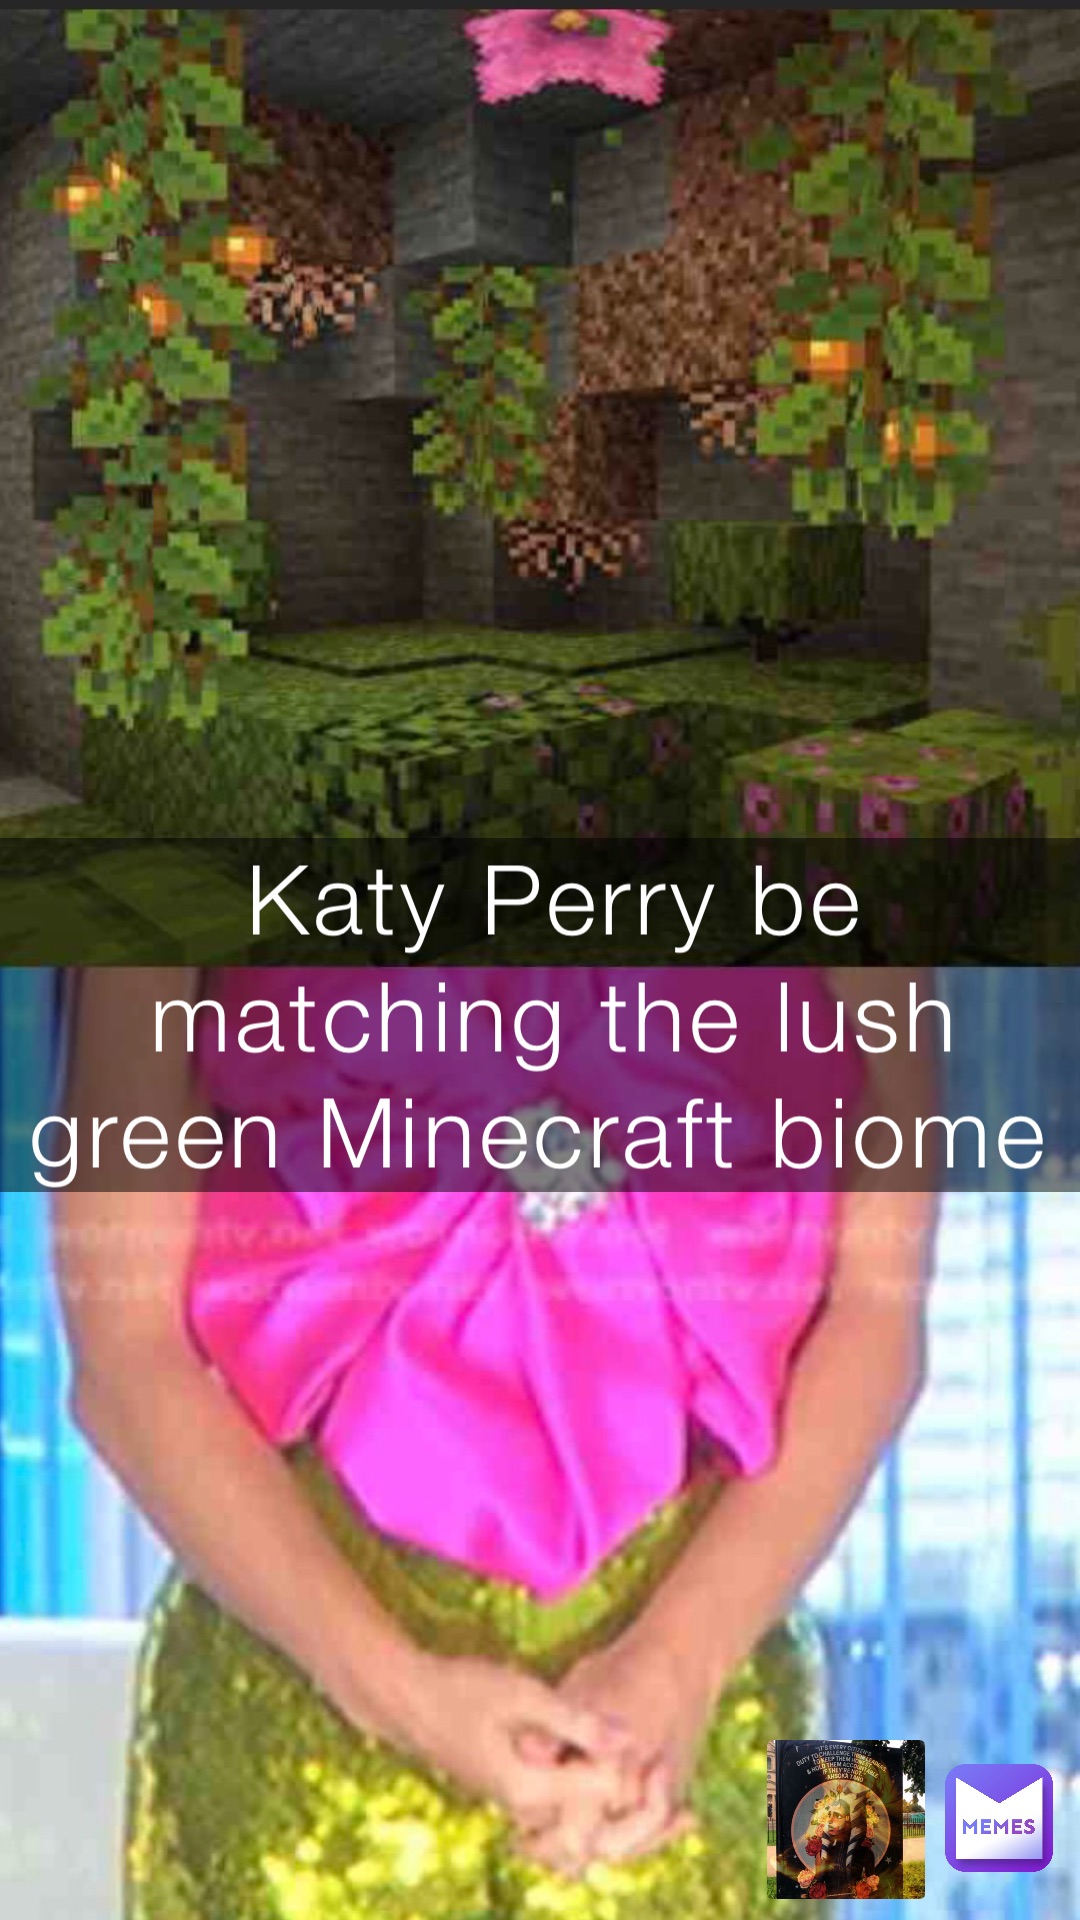 Katy Perry be matching the lush green Minecraft biome